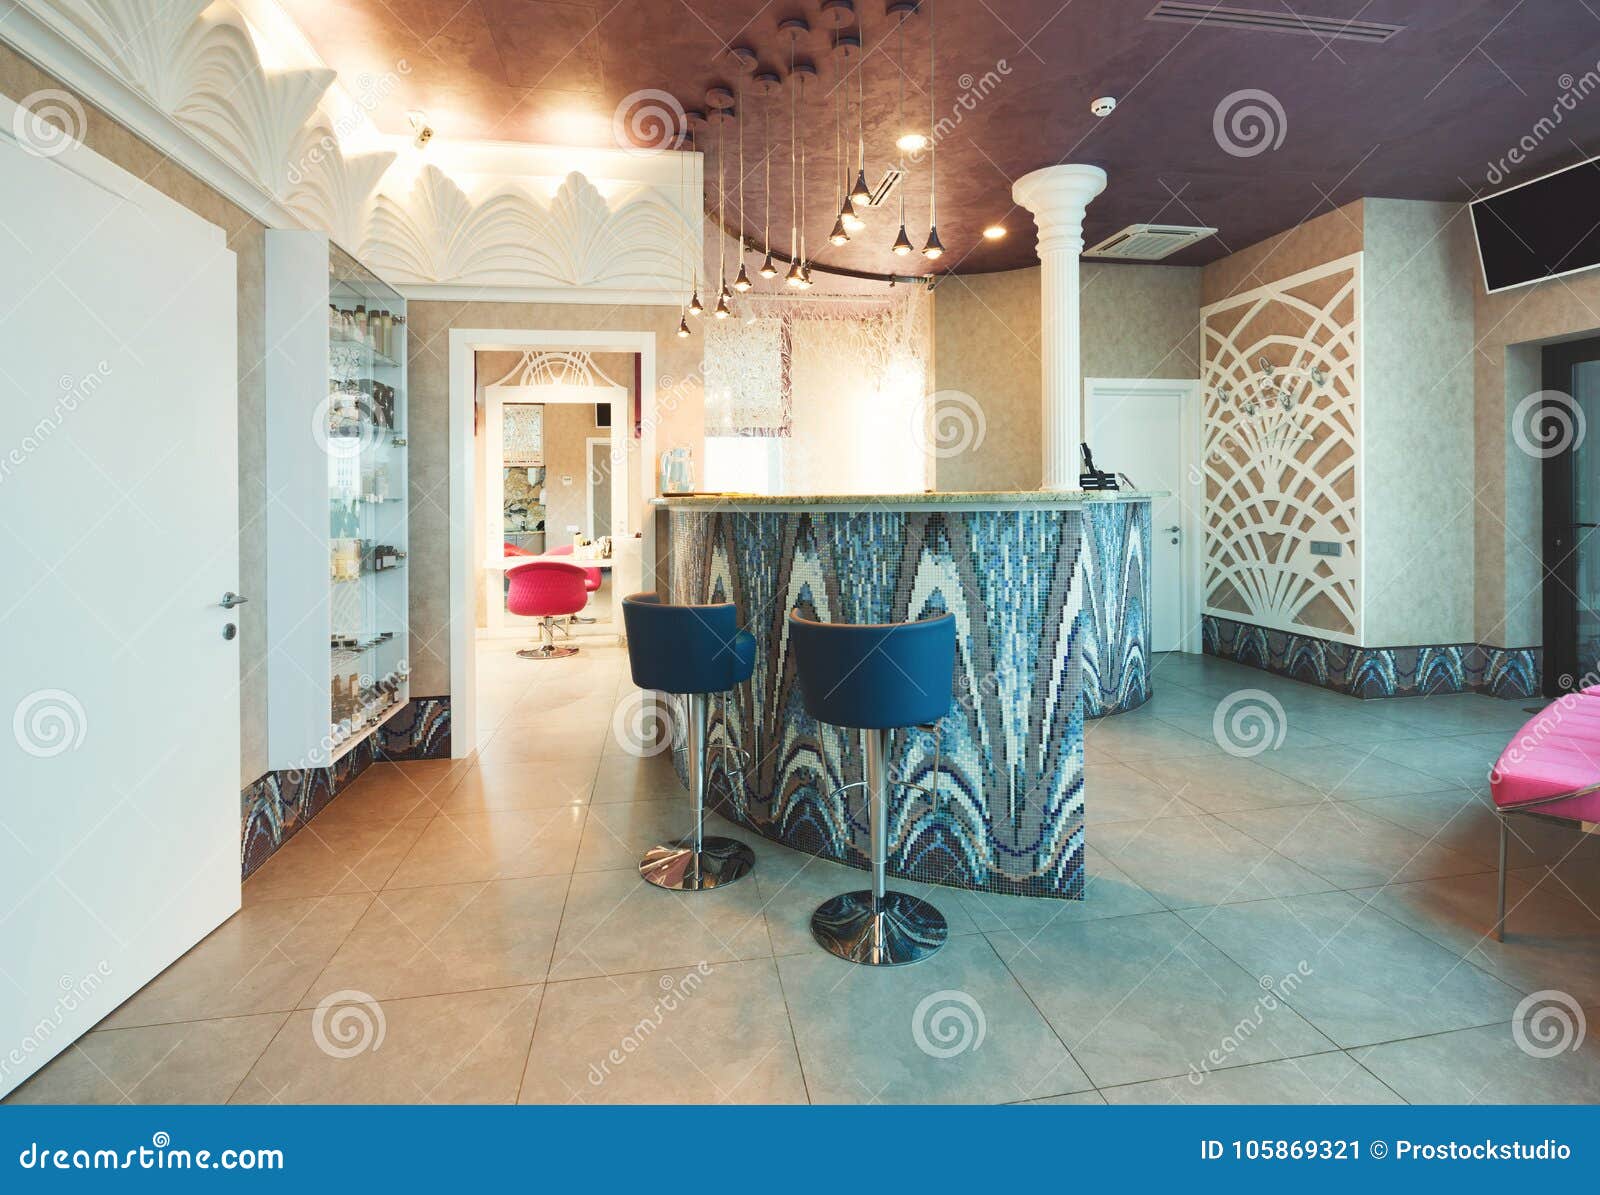 Reception Desk At Spa Or Beauty Salon Stock Image Image Of Large